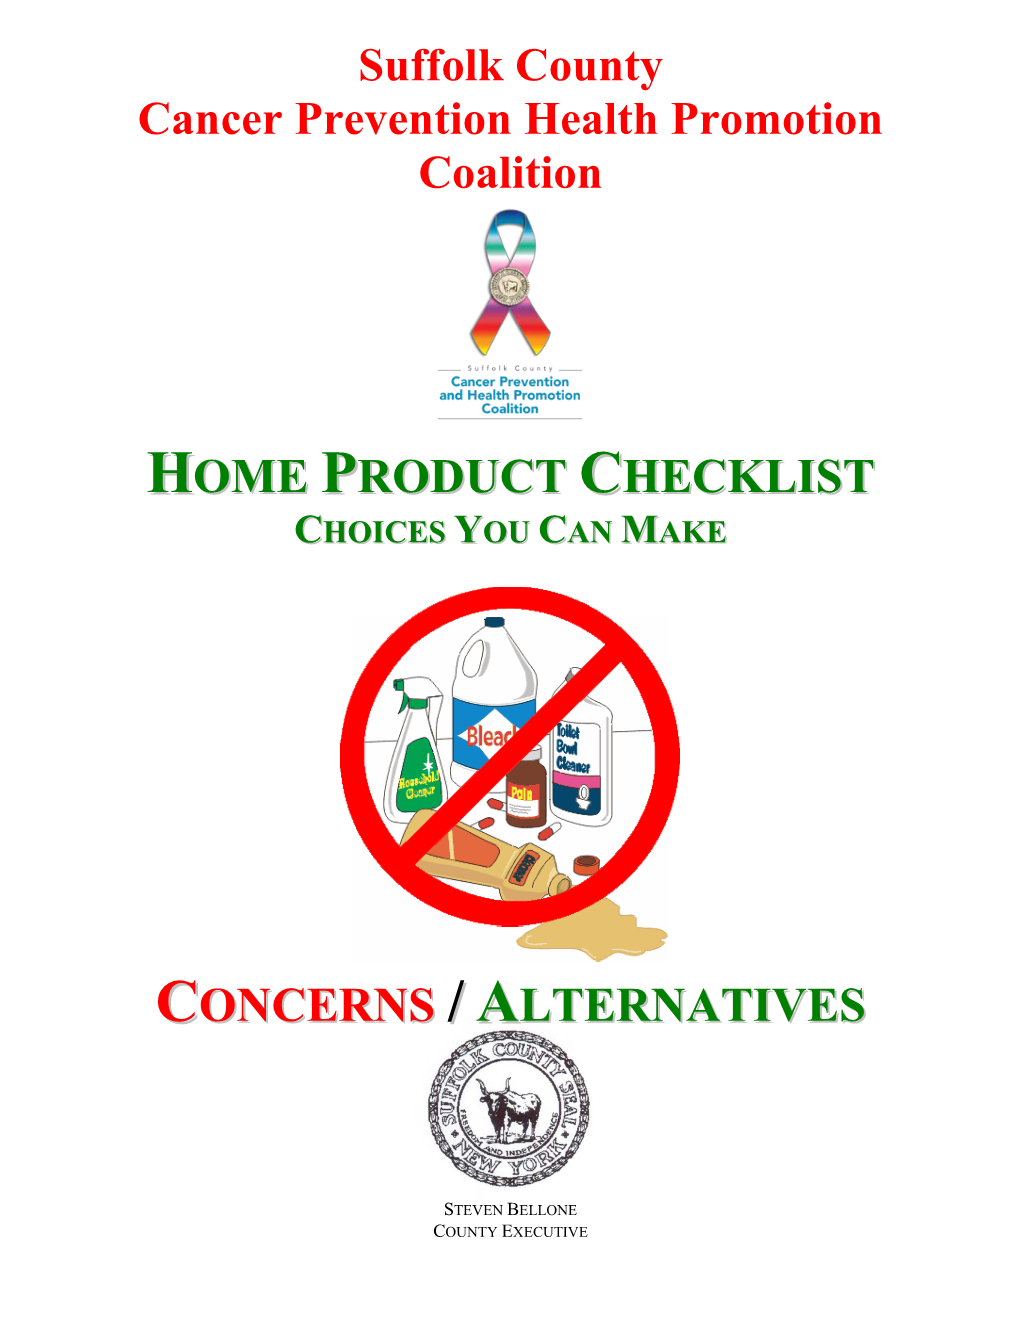 Home Product Checklist